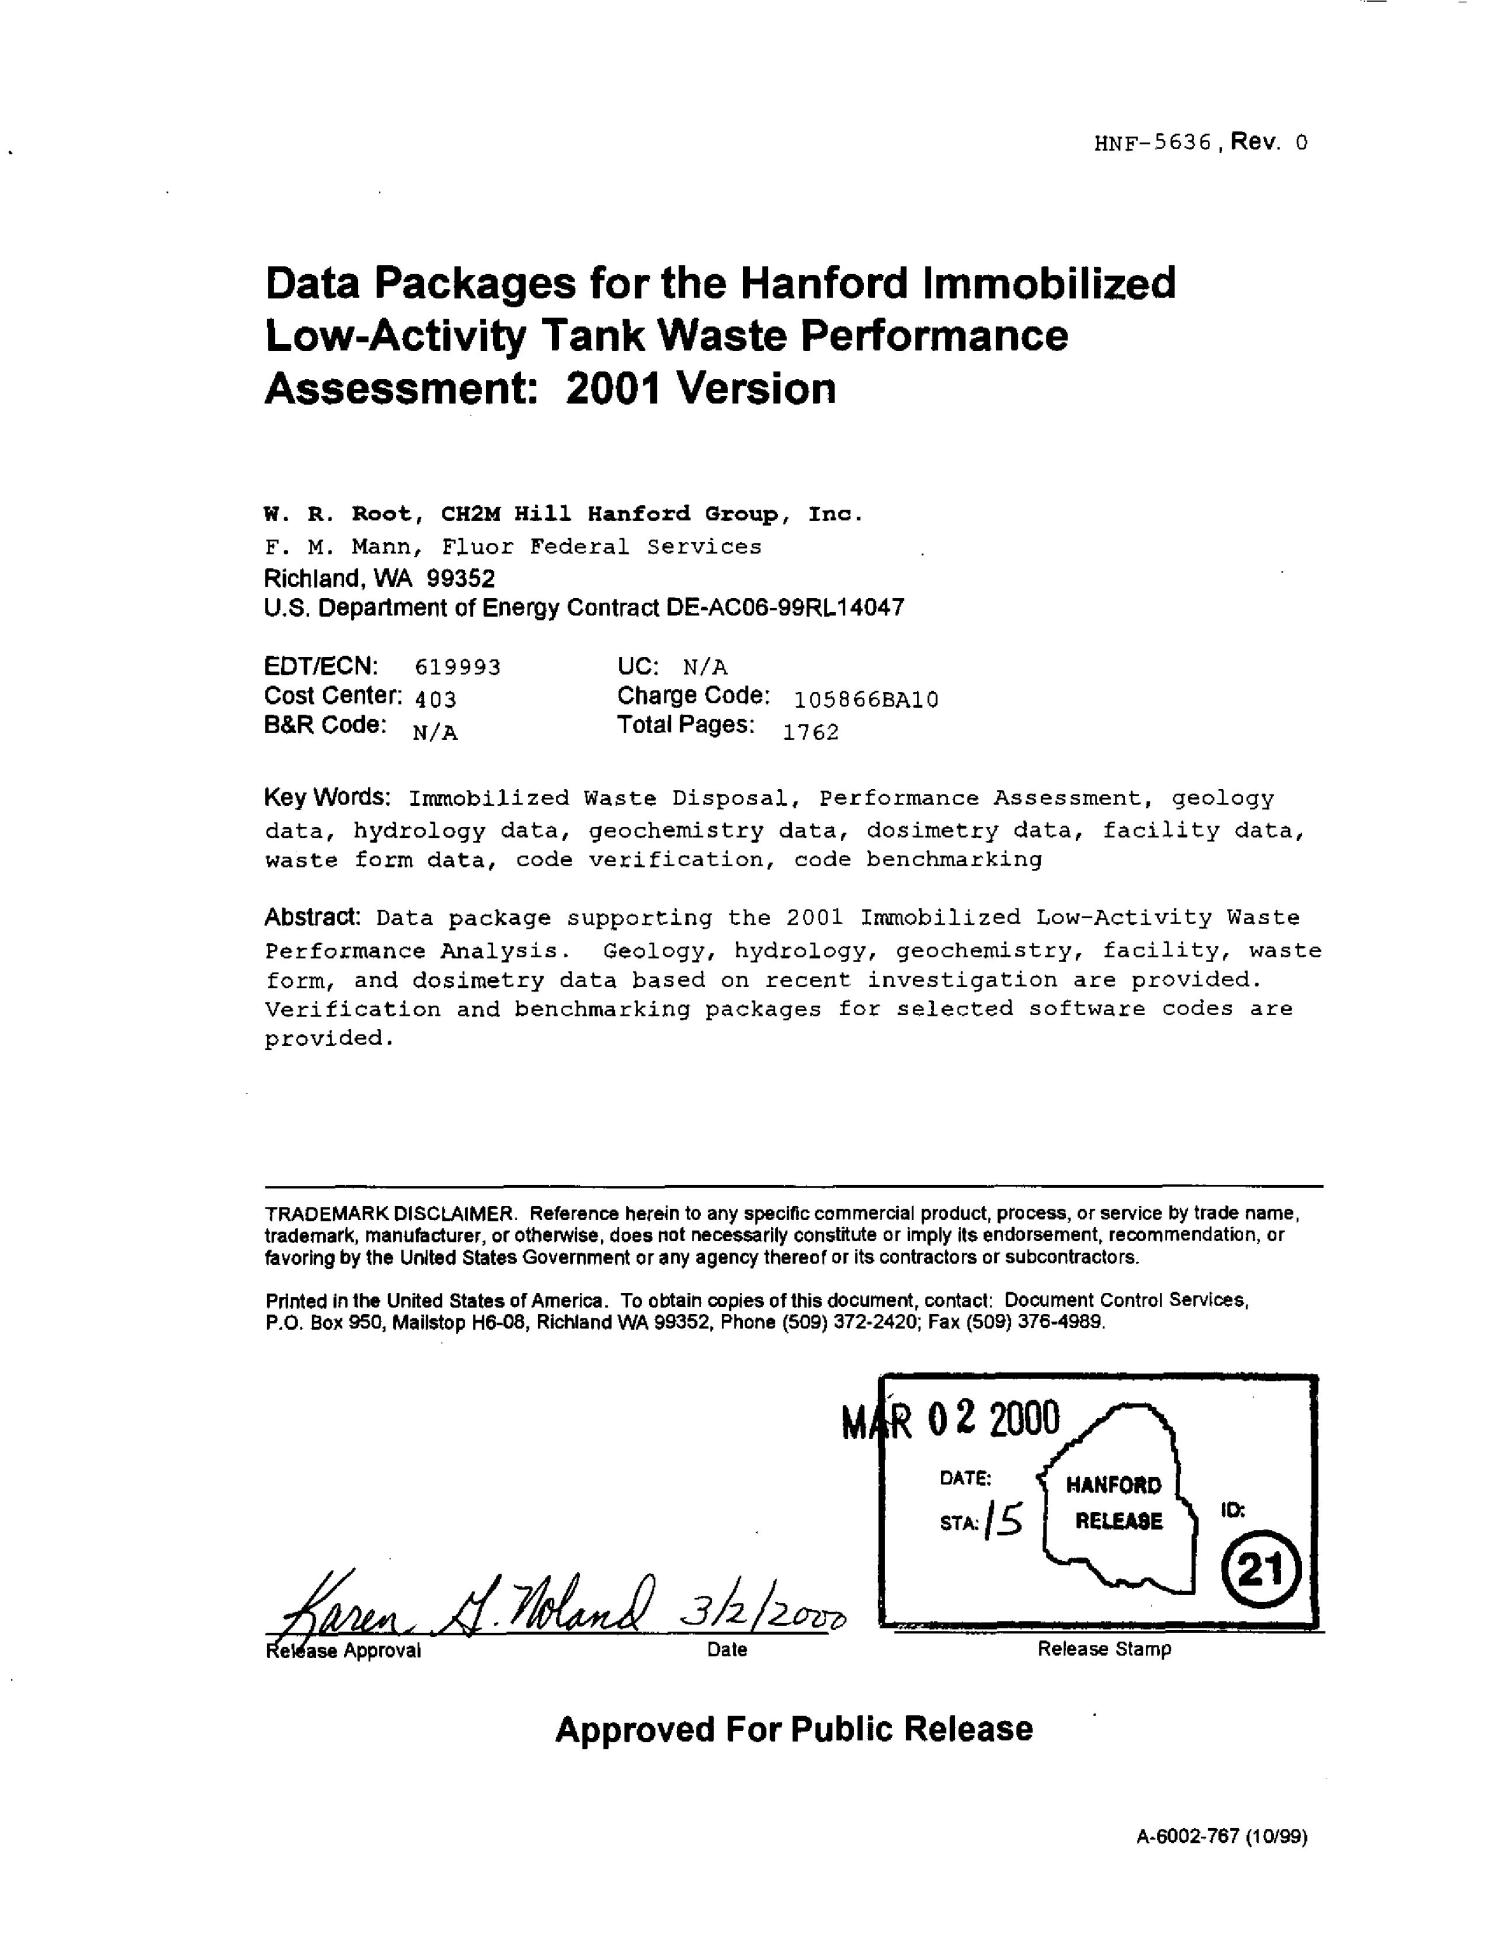 Data Packages for the Hanford Immobilized Low Activity Tank Waste Performance Assessment 2001 Version [SEC 1 THRU 5]
                                                
                                                    [Sequence #]: 4 of 1769
                                                